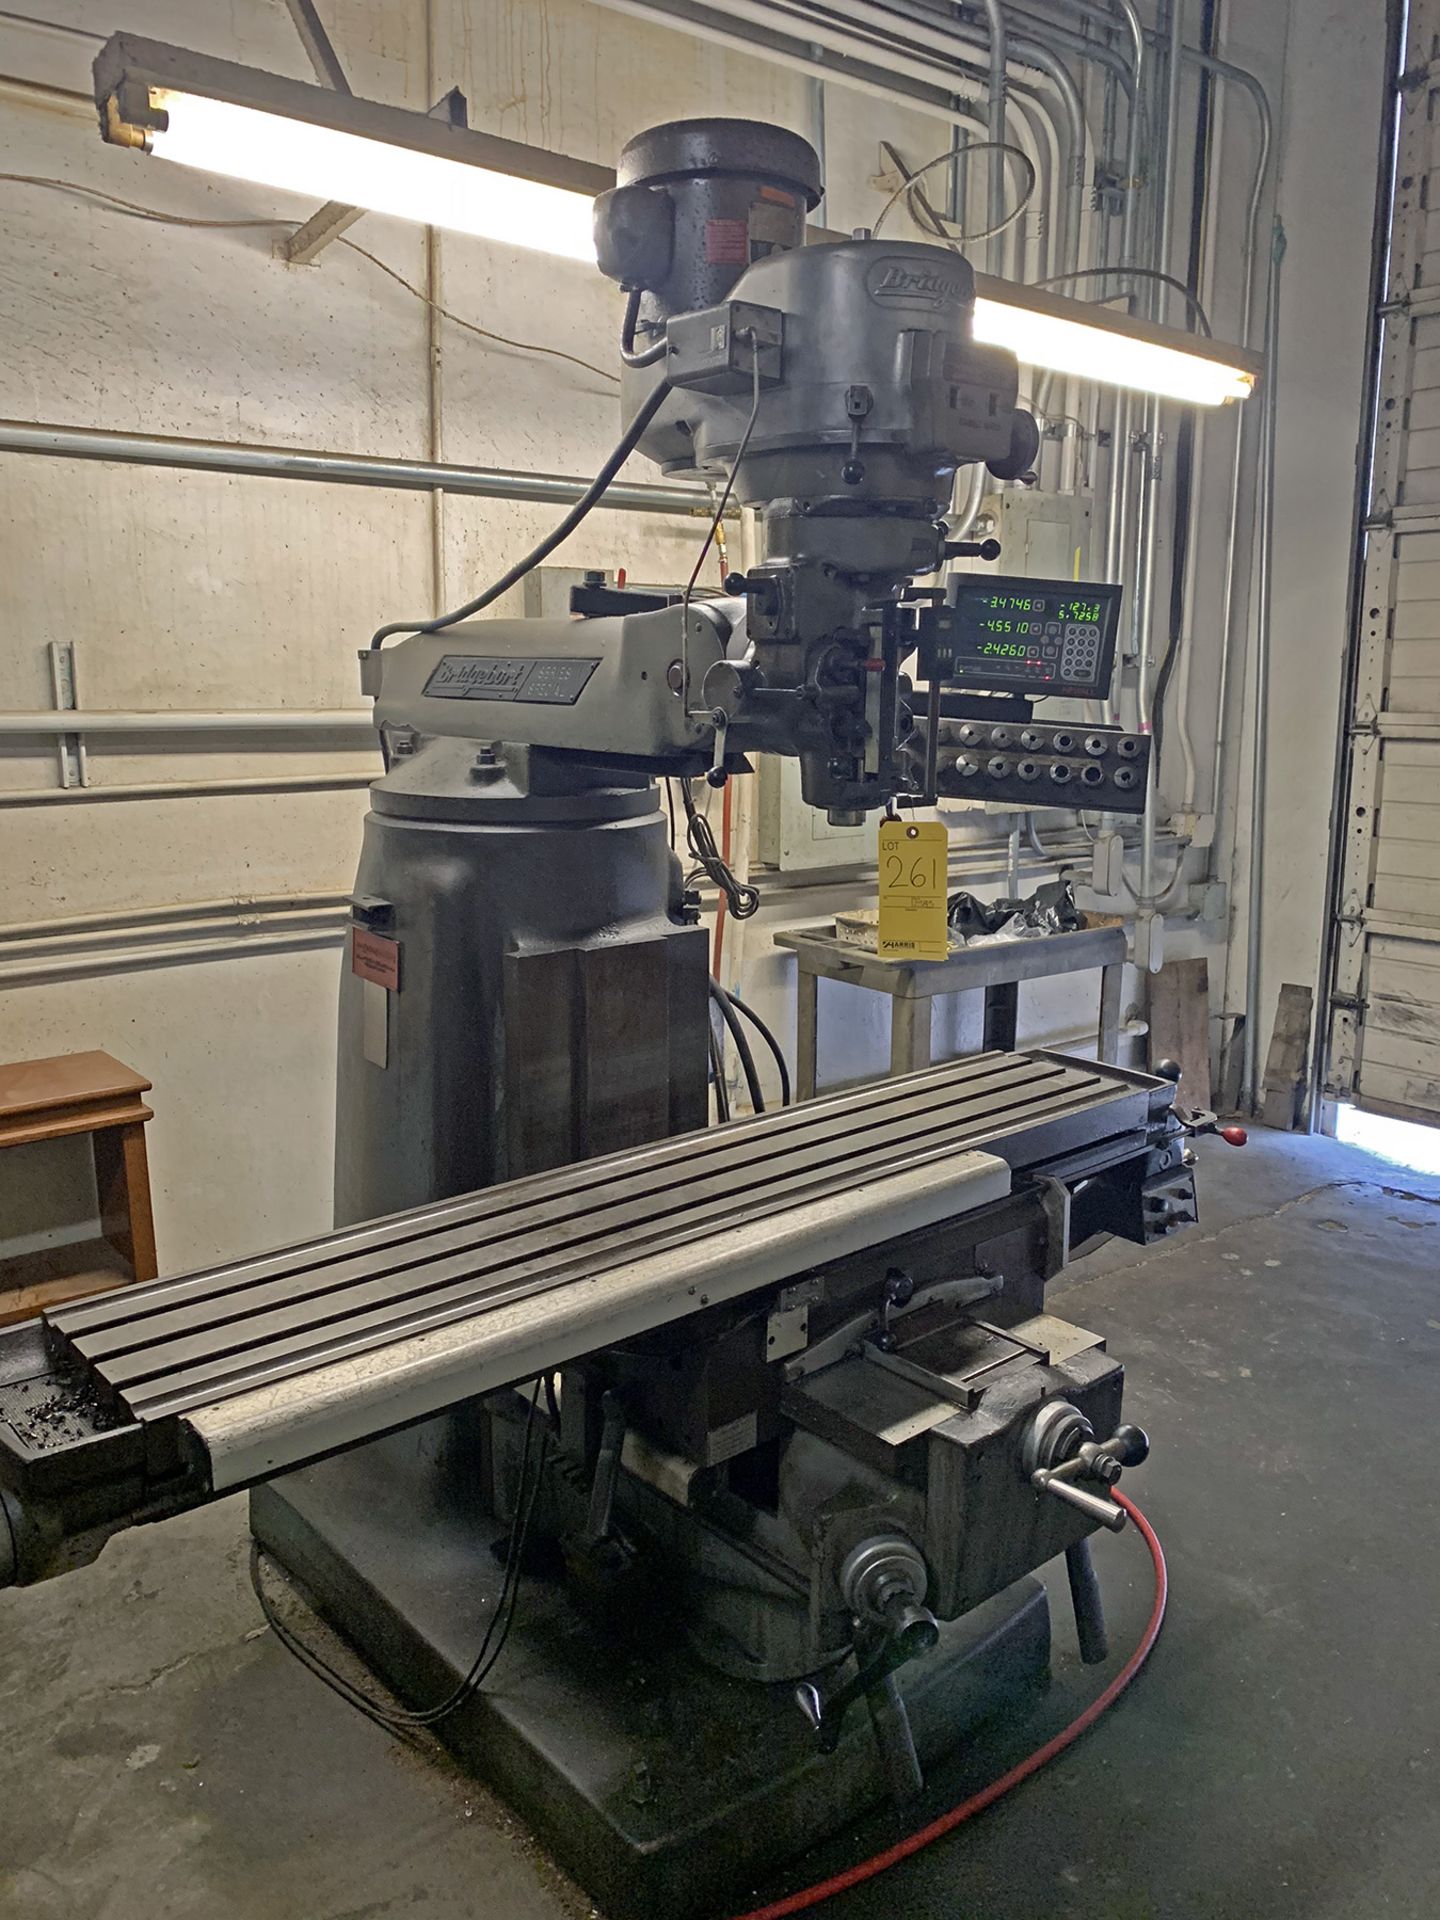 10" x 54" Bridgeport Series II Special Vertical Milling Machine, 10” x 54” table, Newall 3-axis DRO,